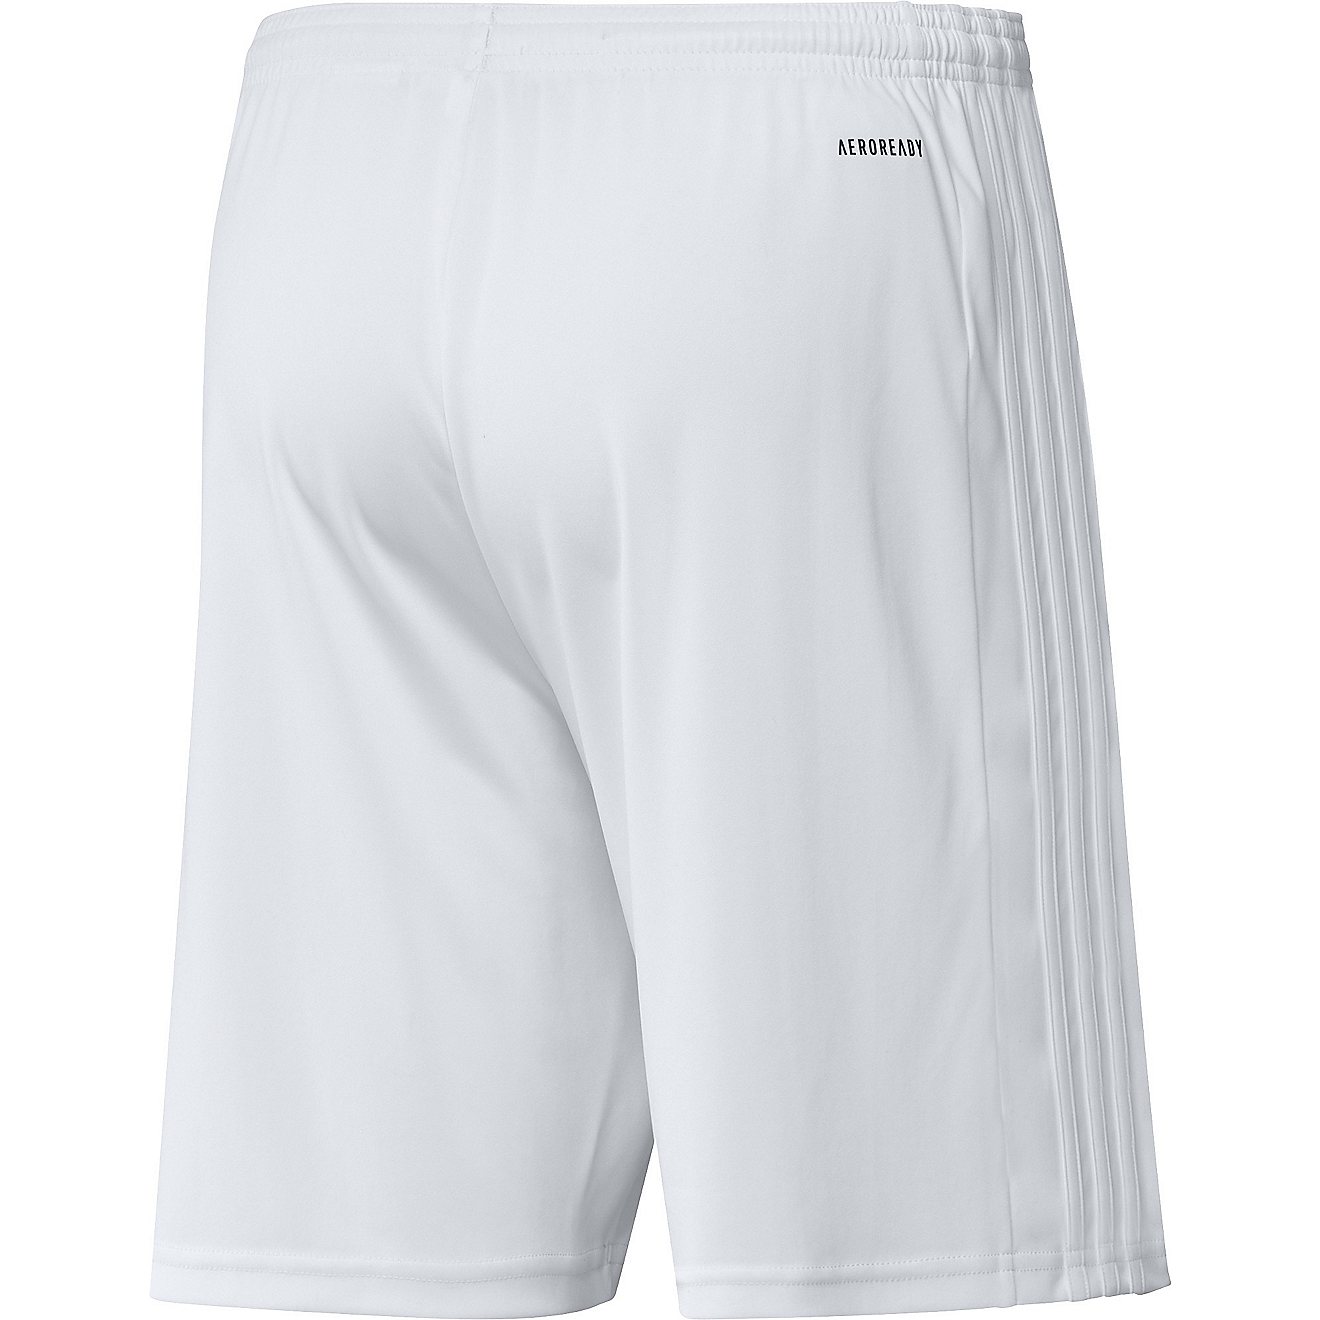 adidas Men’s Squadra 21 Soccer Shorts                                                                                          - view number 7